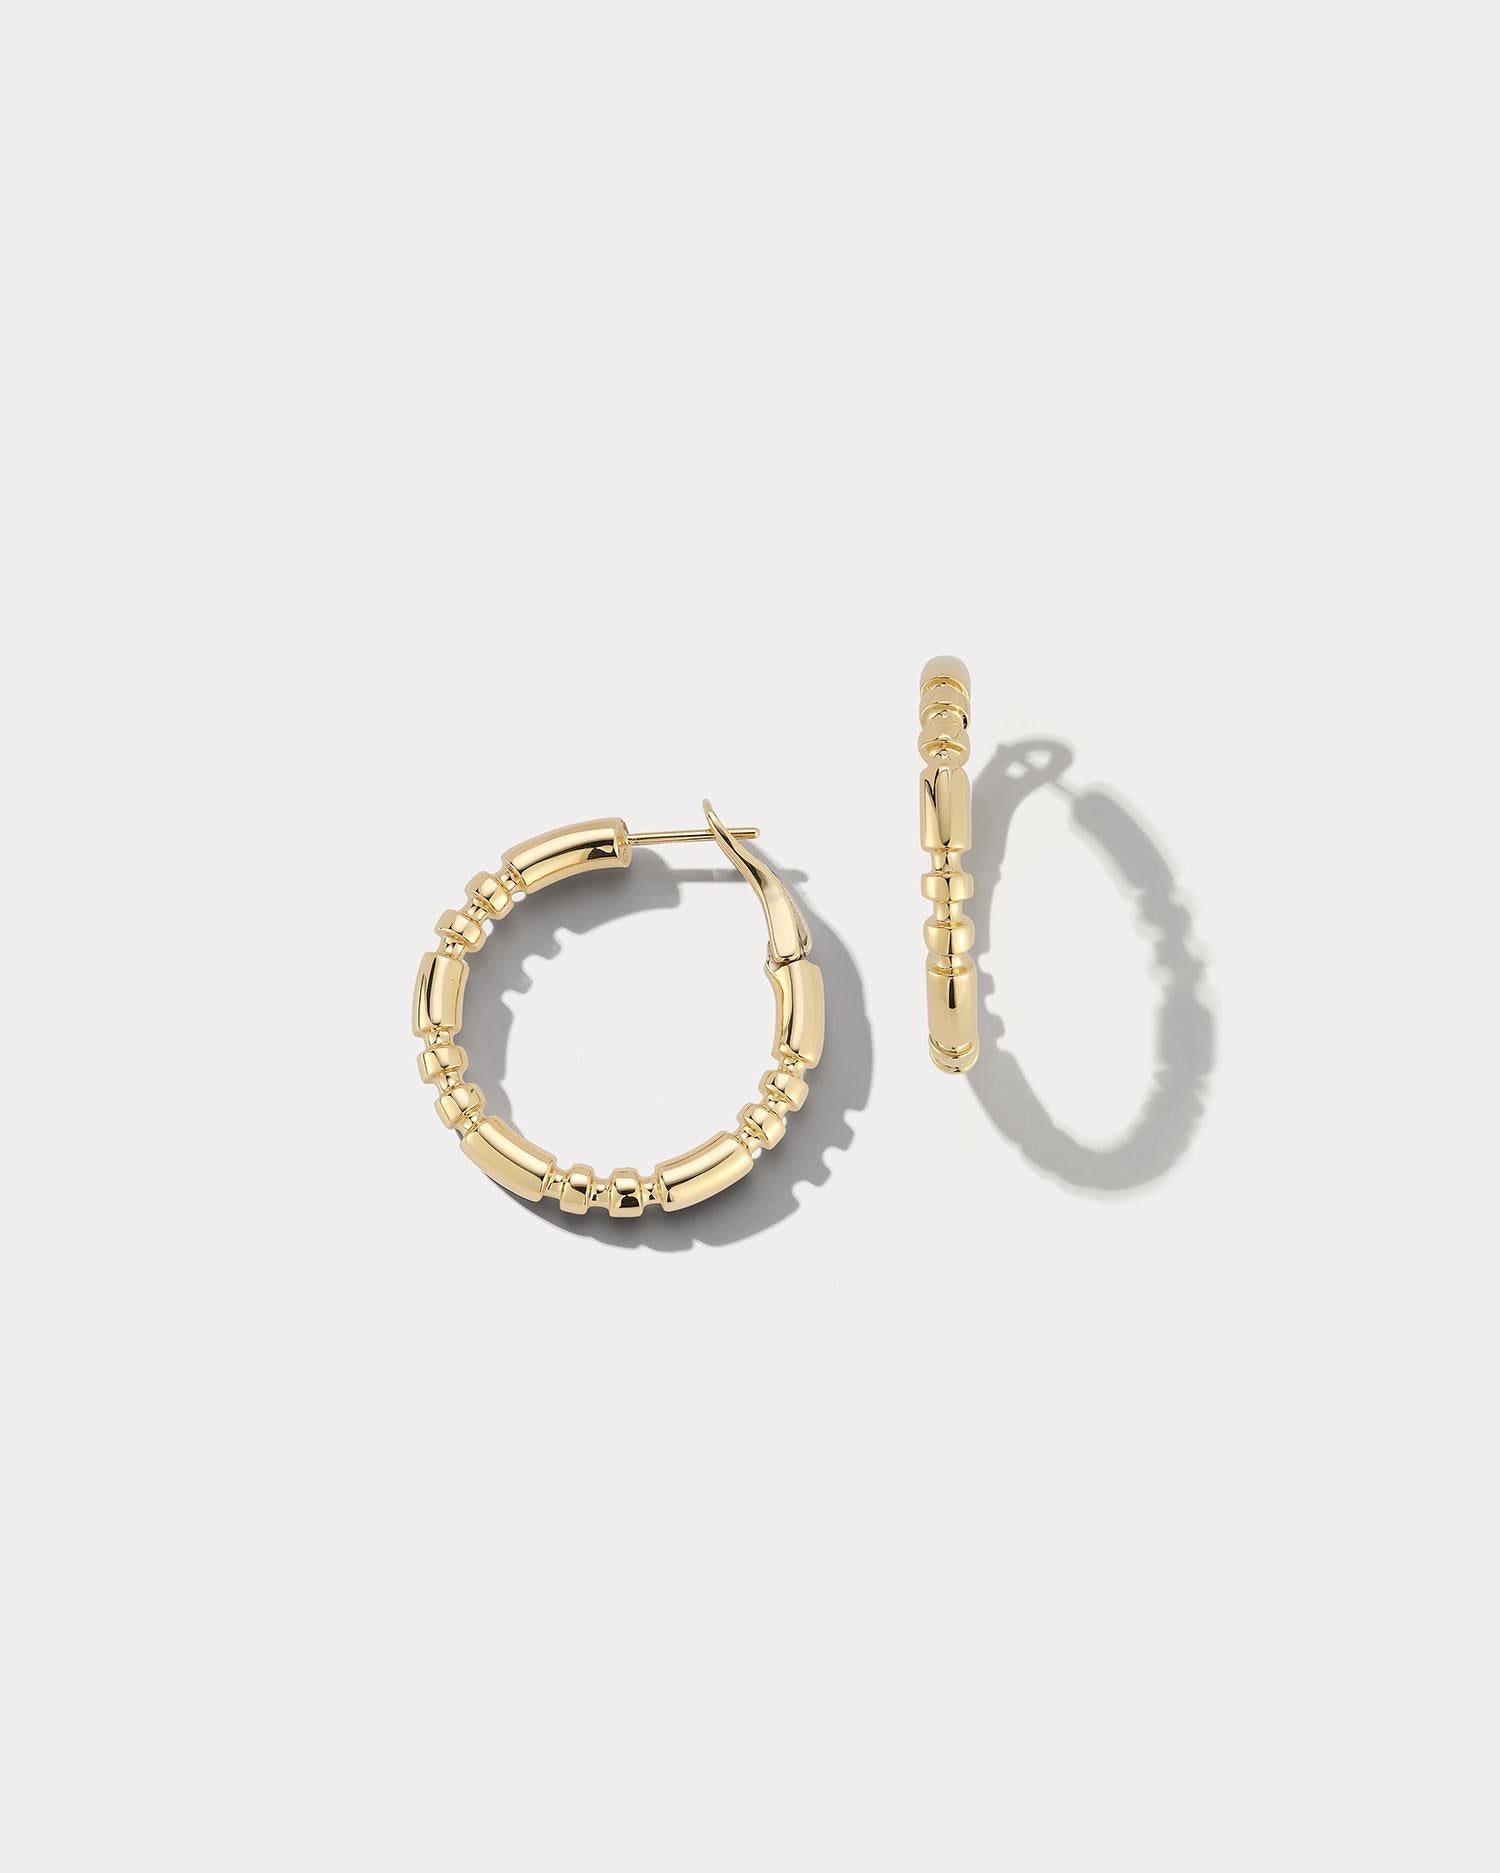 These exquisite hoop earrings are made from premium 18k yellow gold and feature a sleek, polished finish. The small size of the hoops makes them ideal for everyday wear or for adding a touch of luxury to a special occasion. The hoops have a classic